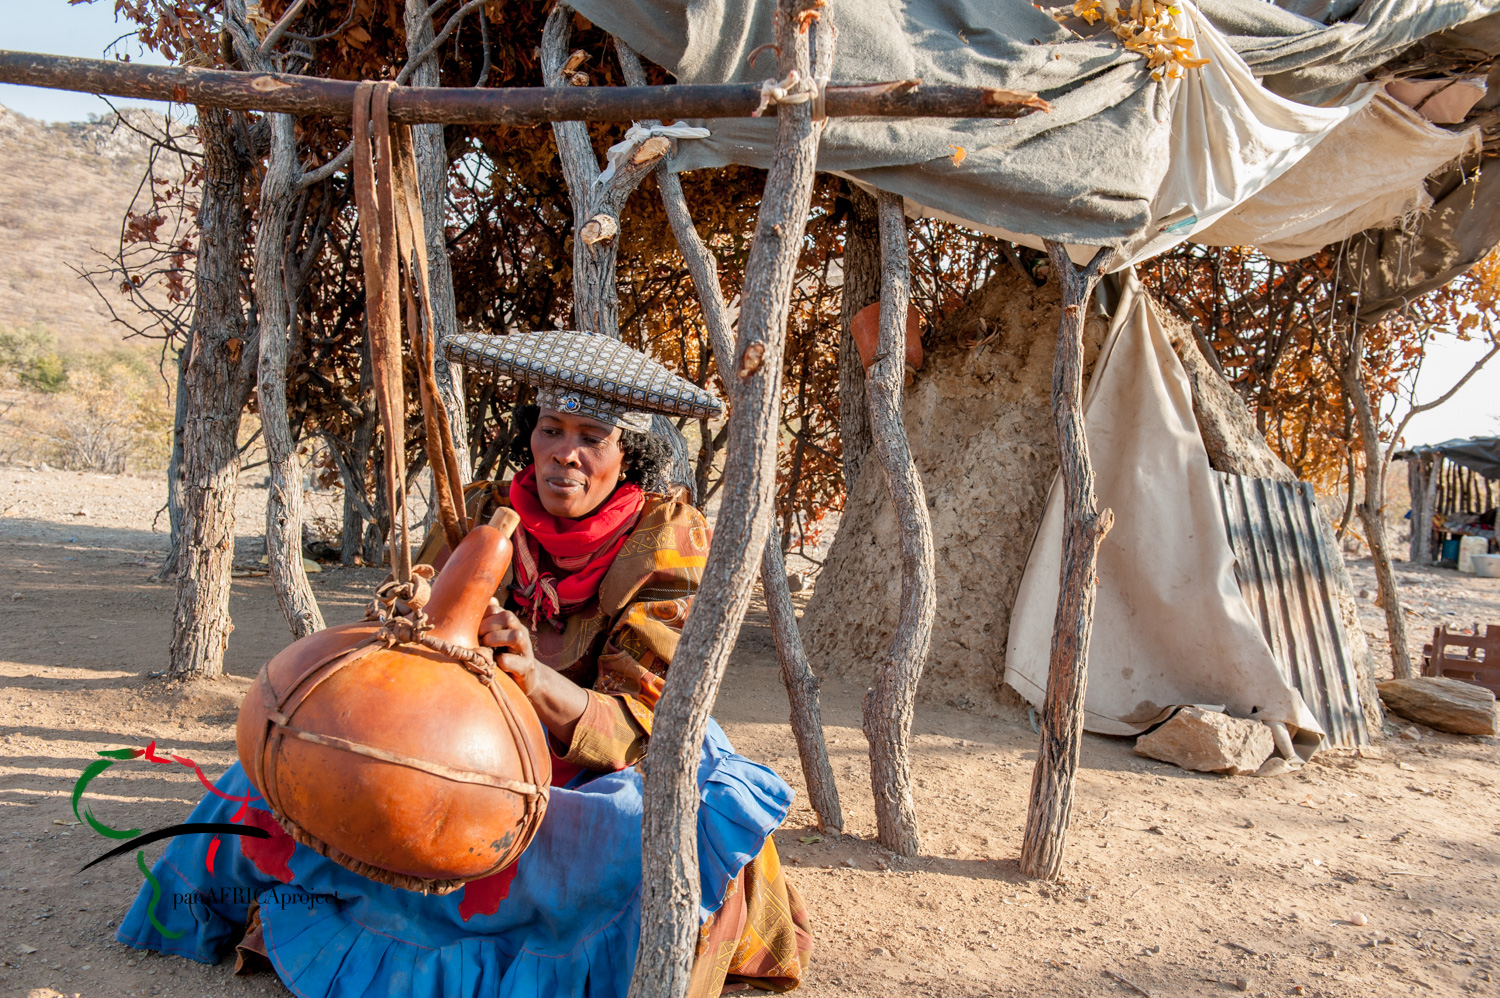 Woman from Herero Tribe churning butter.